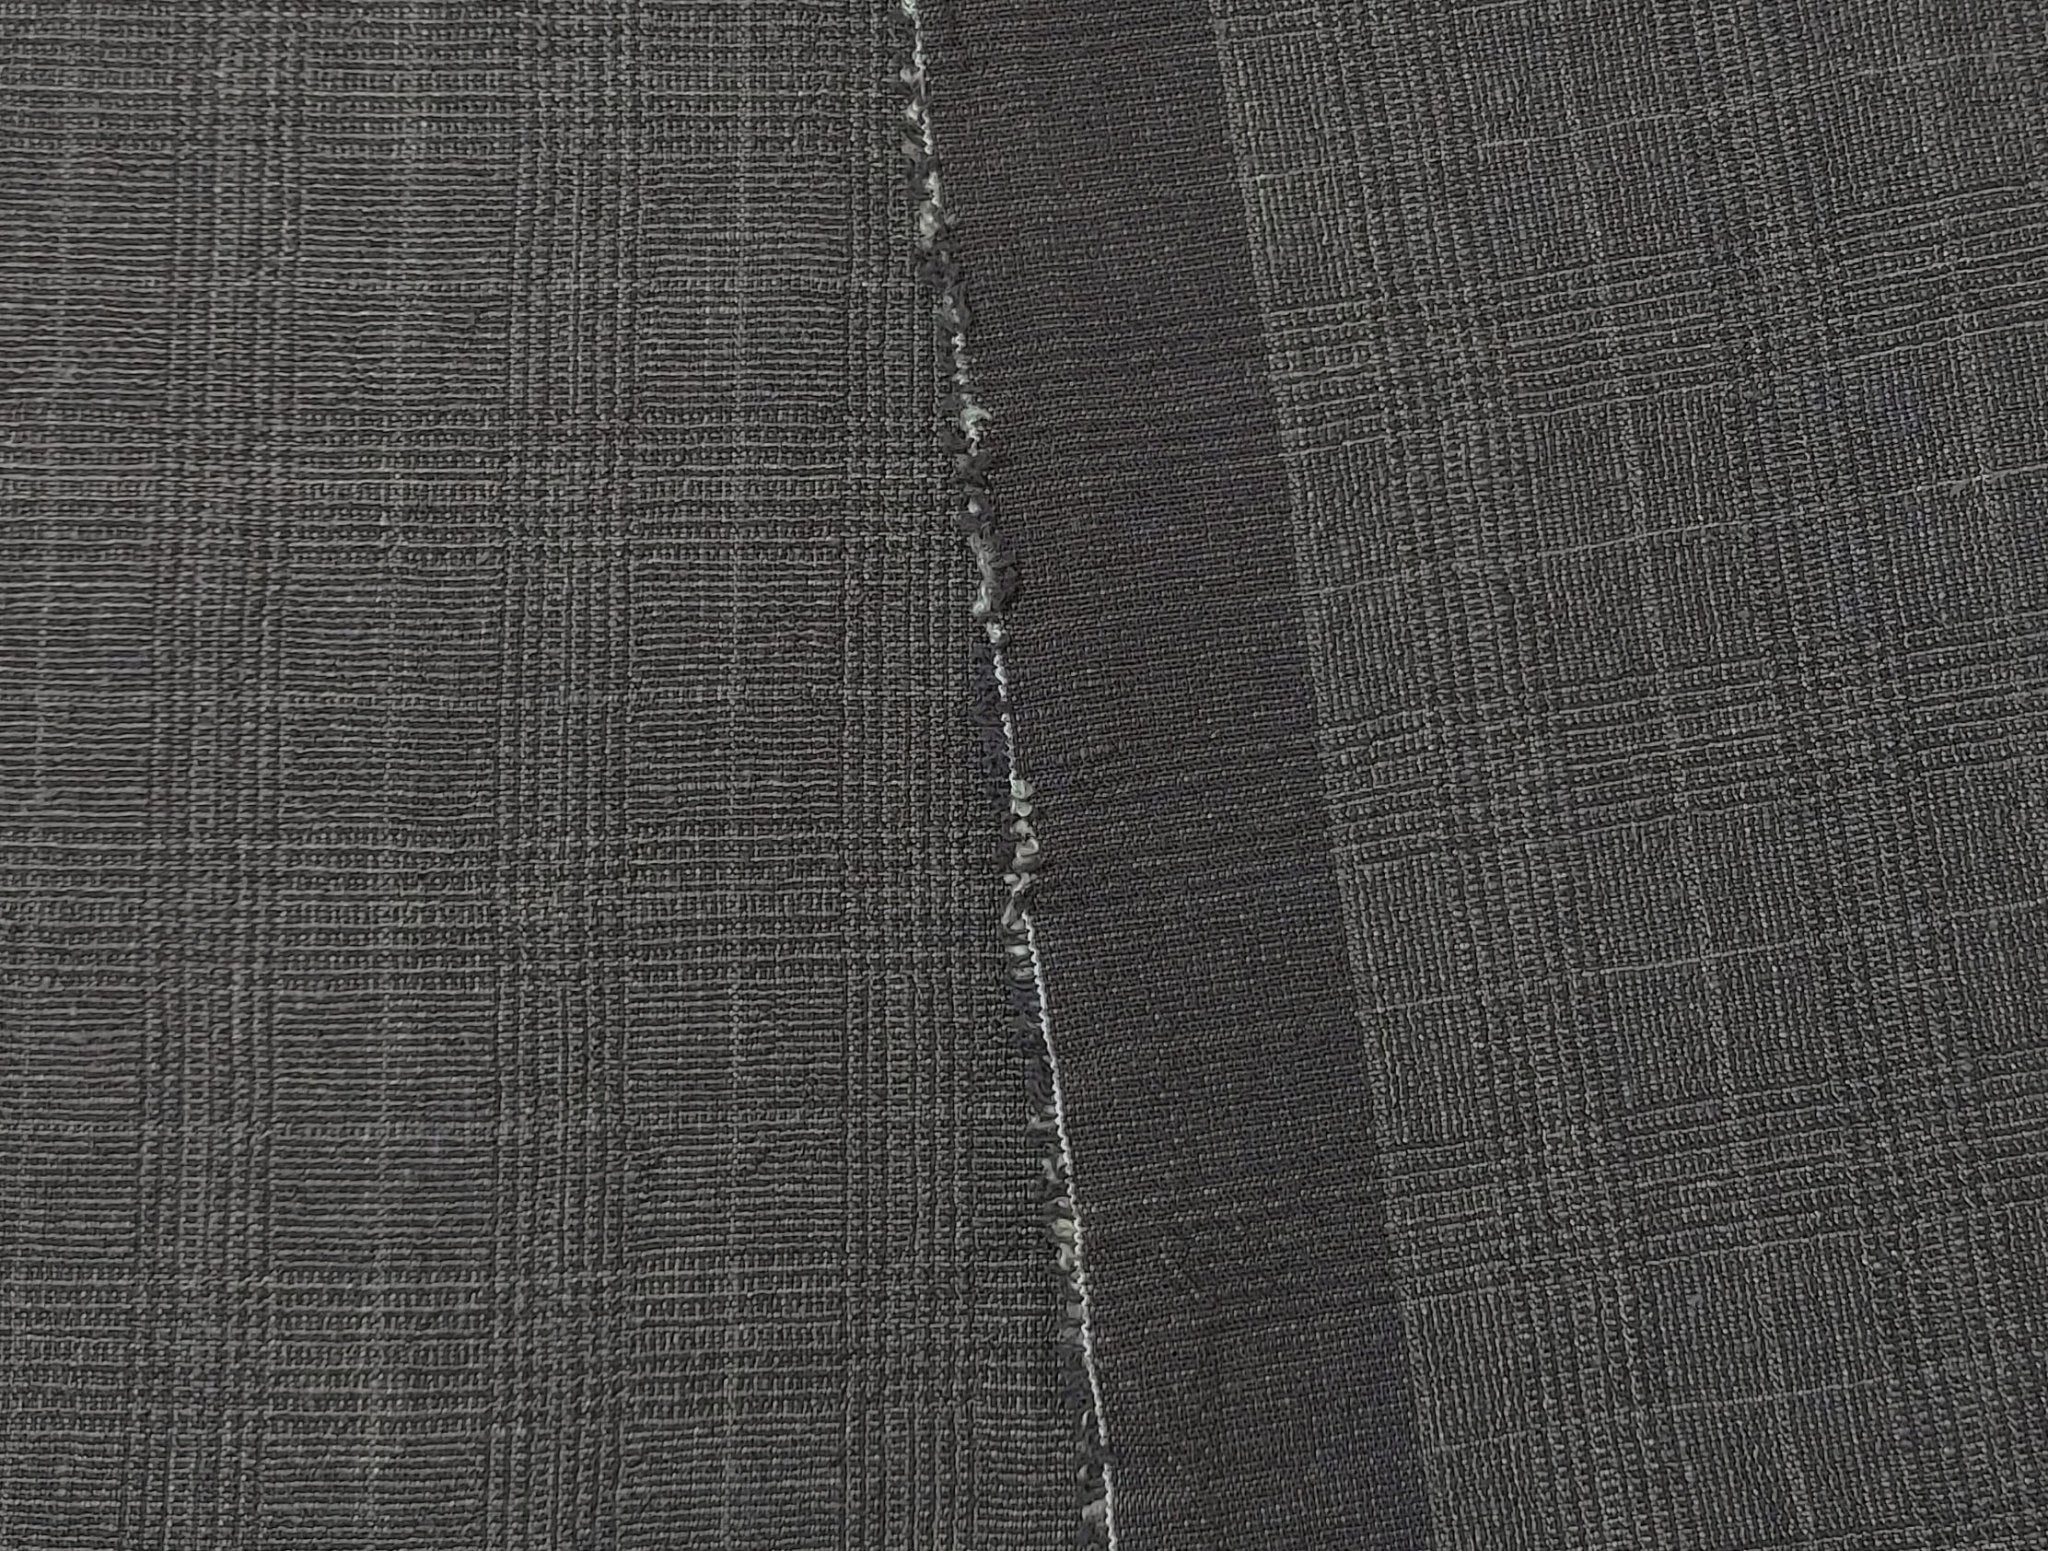 Linen Cotton Glen Plaid Fabric: Heavyweight Elegance for Crafting and Home Décor 7582 7583 - The Linen Lab - Grey